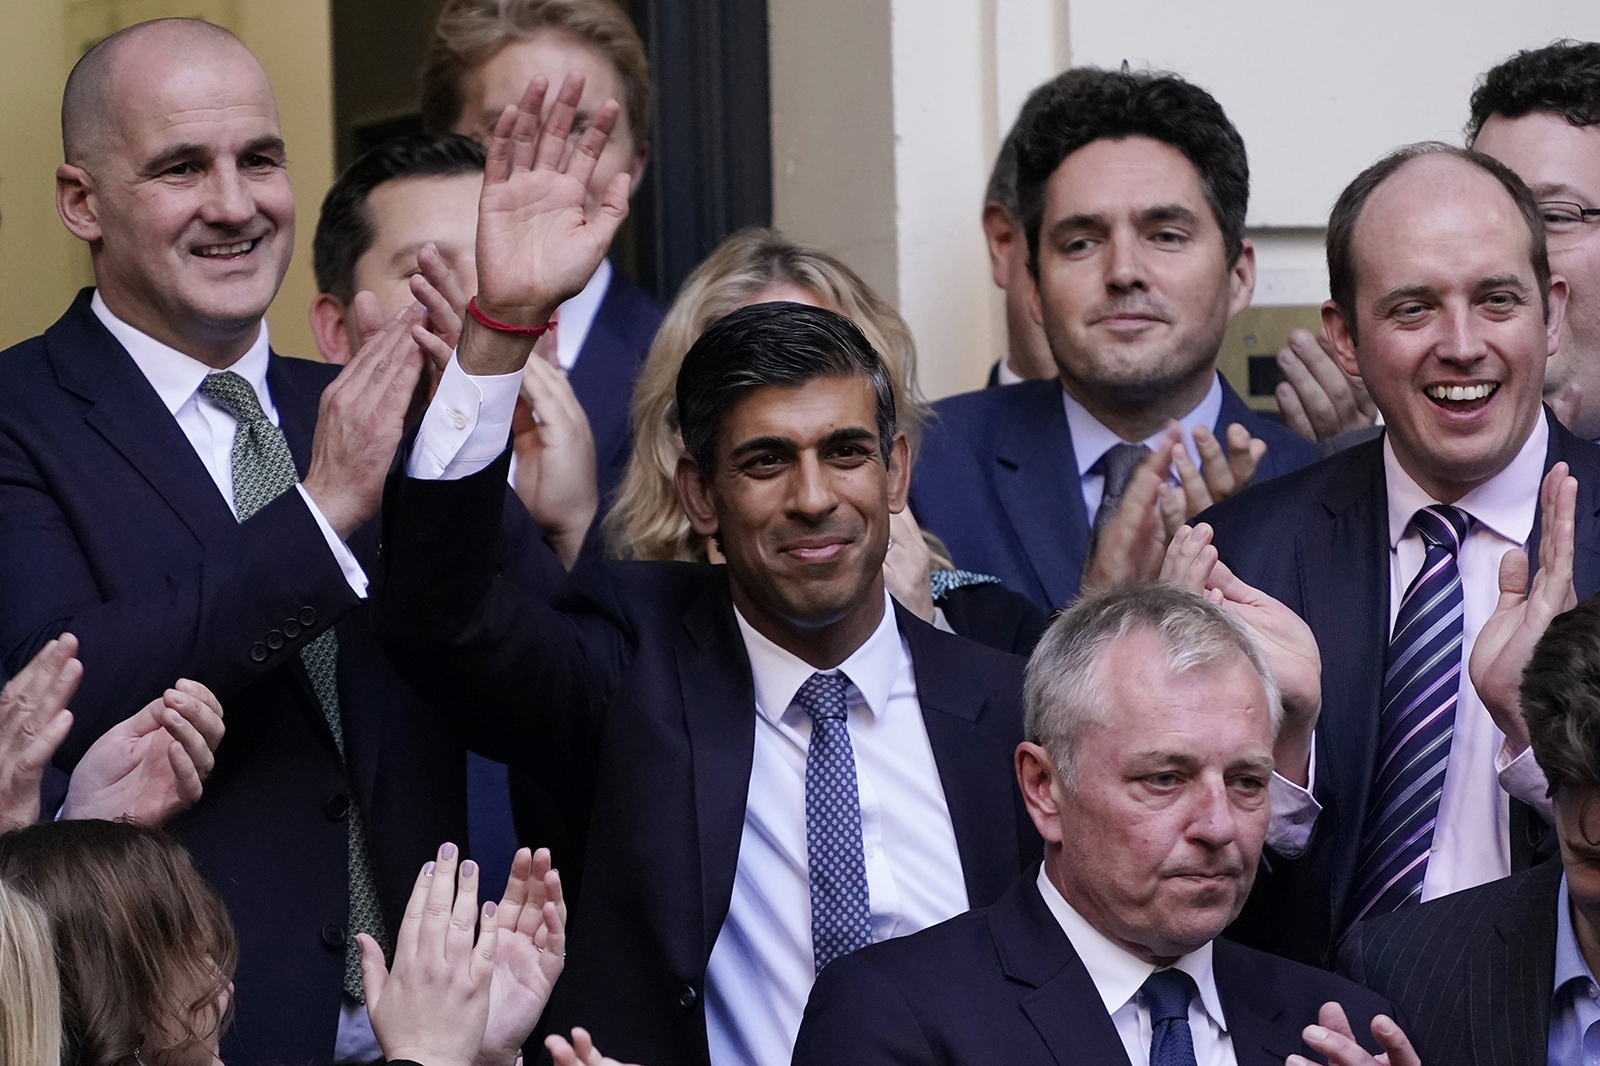 Rishi Sunak, center, waves after winning the Conservative Party leadership contest at the Conservative party Headquarters in London today.